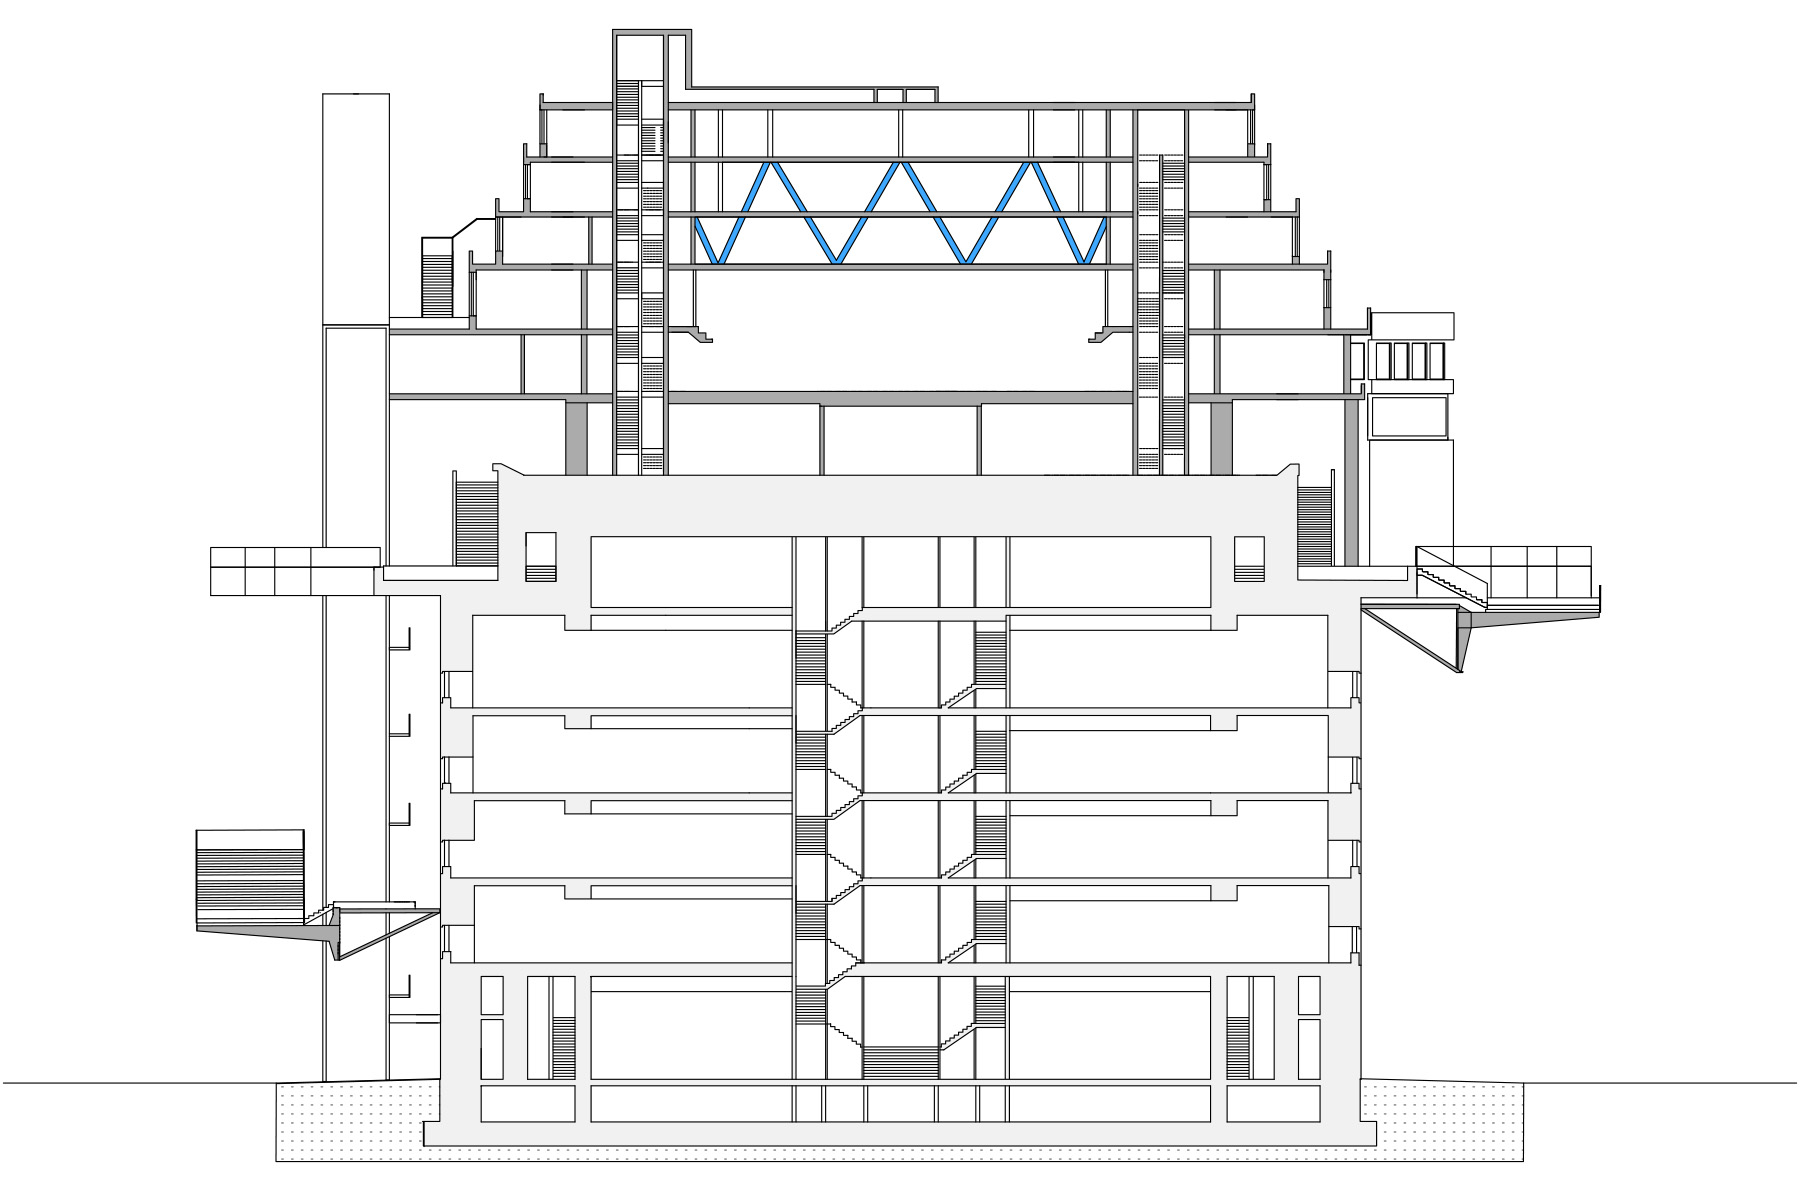 The drawing shows a cutaway view of the new interior levels of the bunker. 